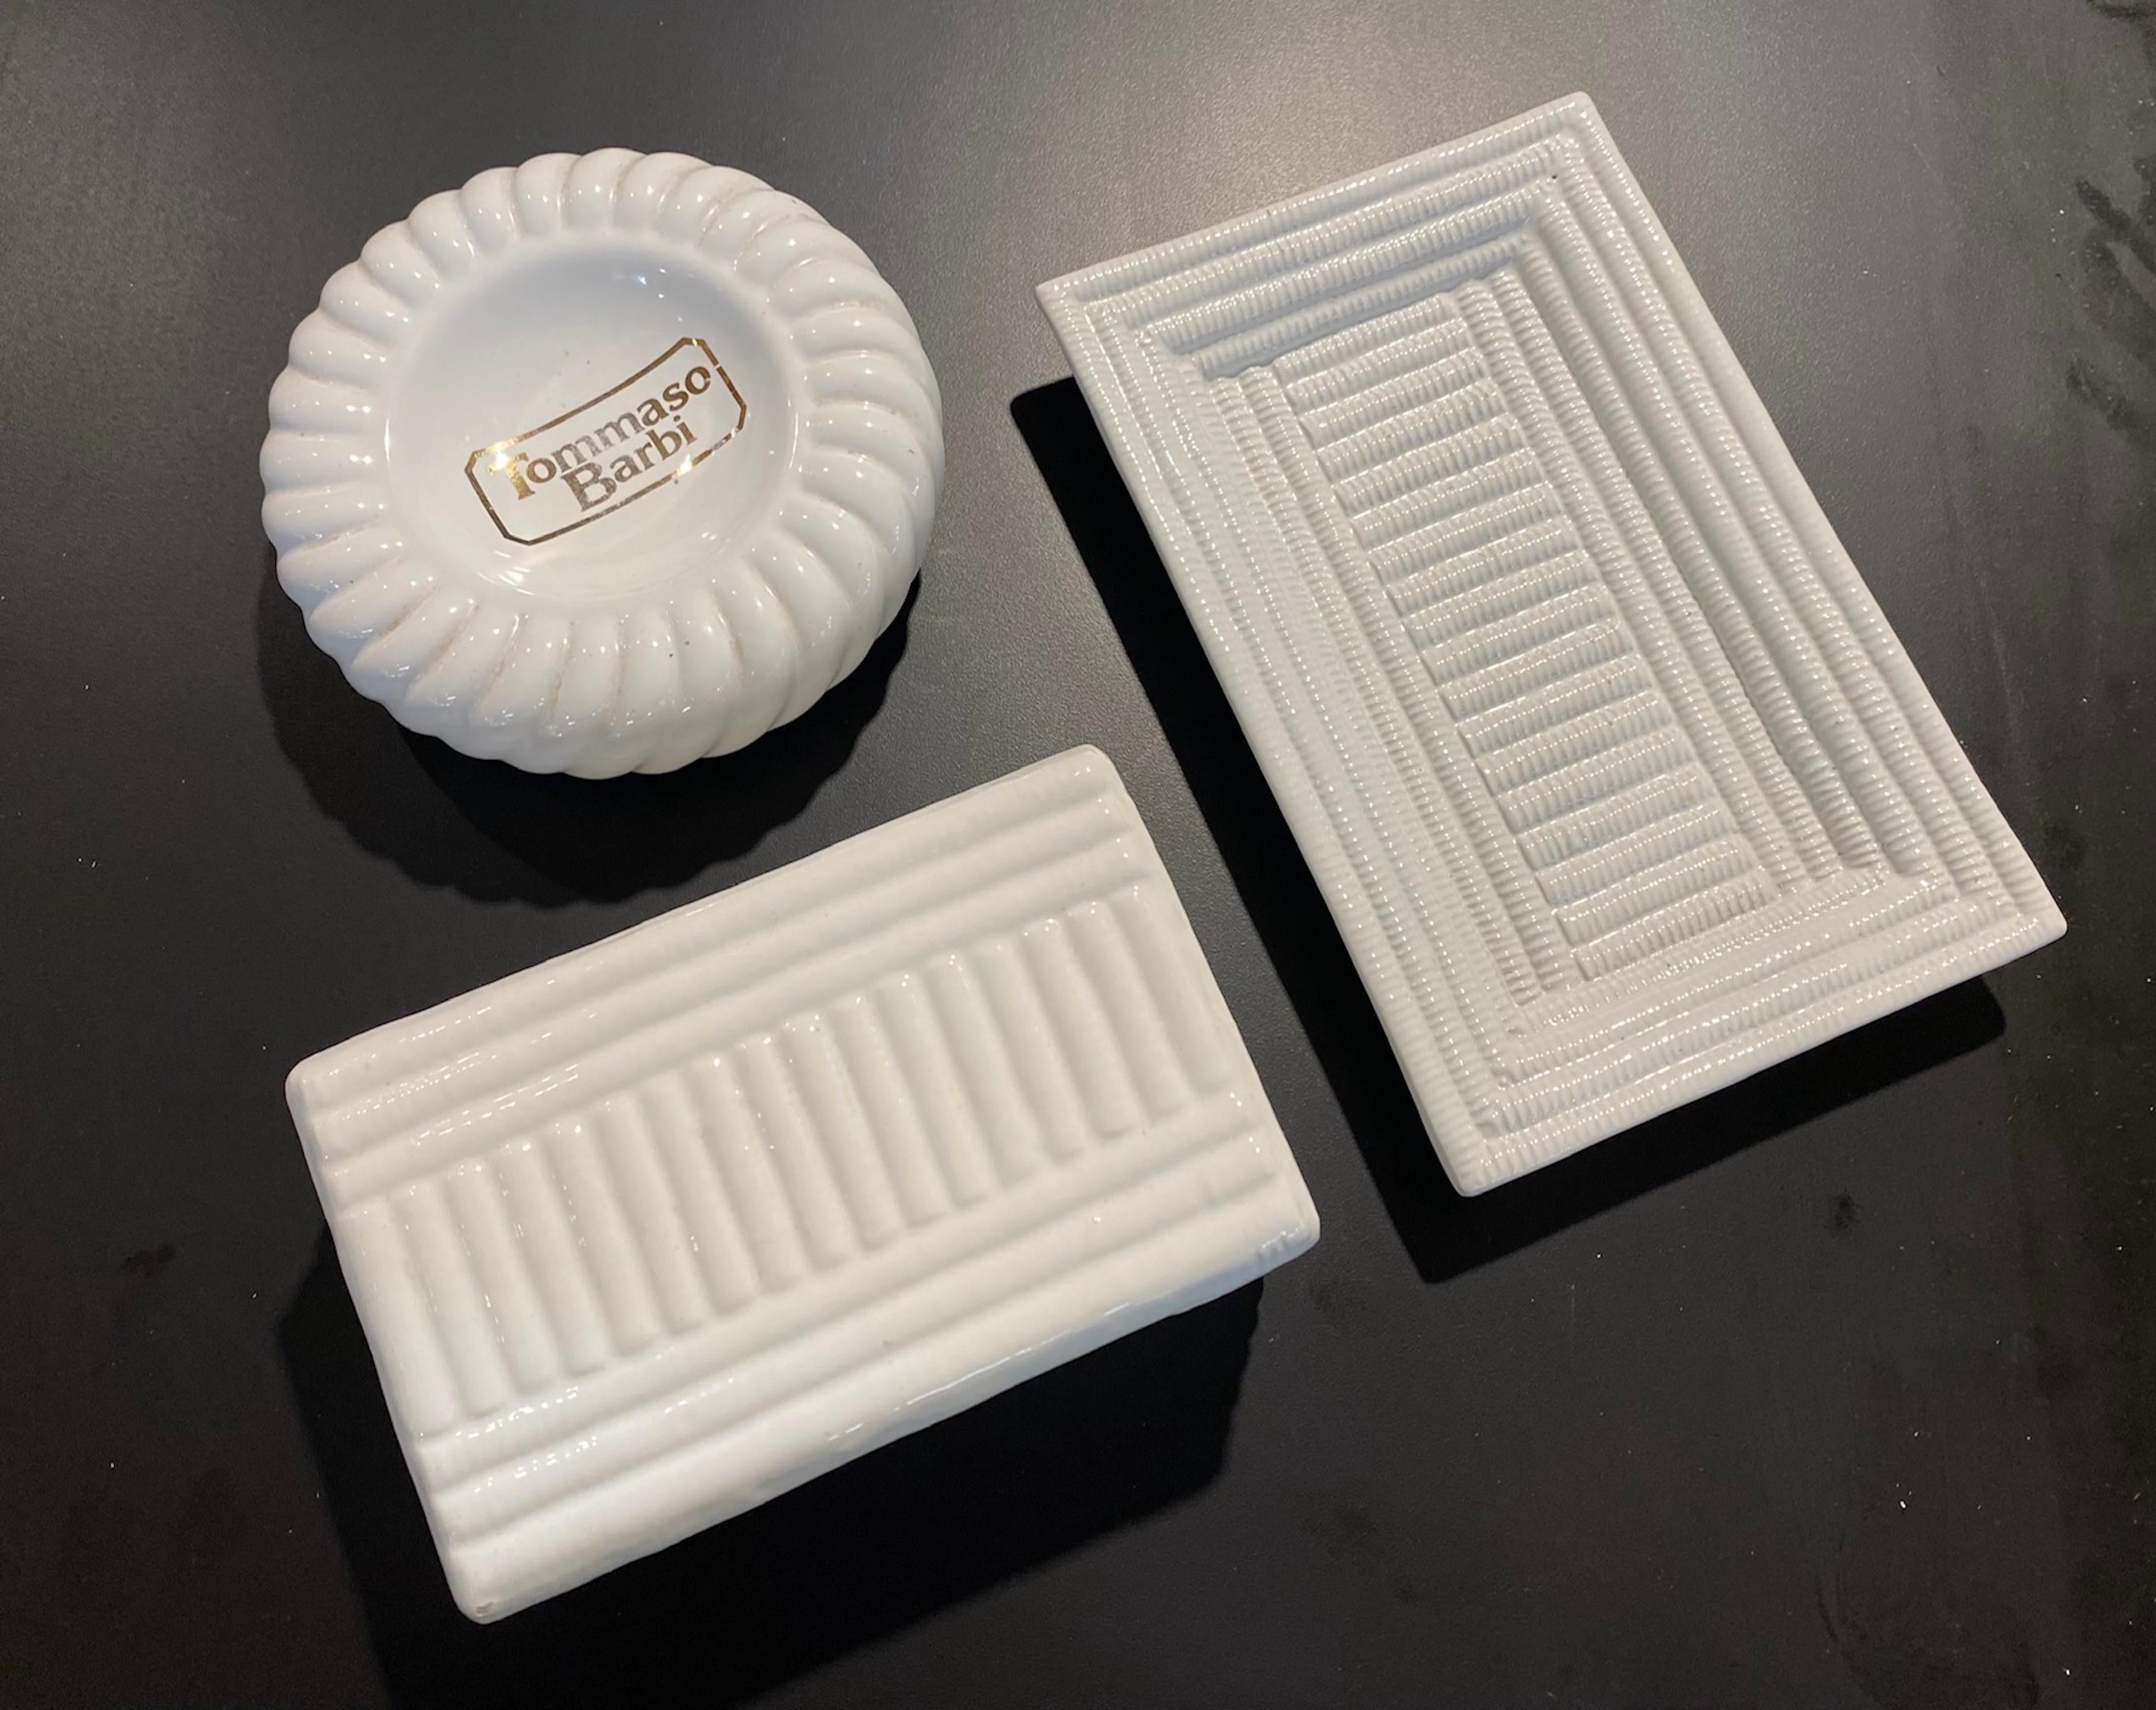 Tommaso Barbi group of 3 1980s ceramic smoking objects of 1 box and 2 ashtrays.
All signed in white glaze B. Ceramiche.
Box.        6.88 W   4.25 D   2.75 H
Round     6.25 D   1.75 H 
Tray.        9.25 L.    6 W.   1.25 H